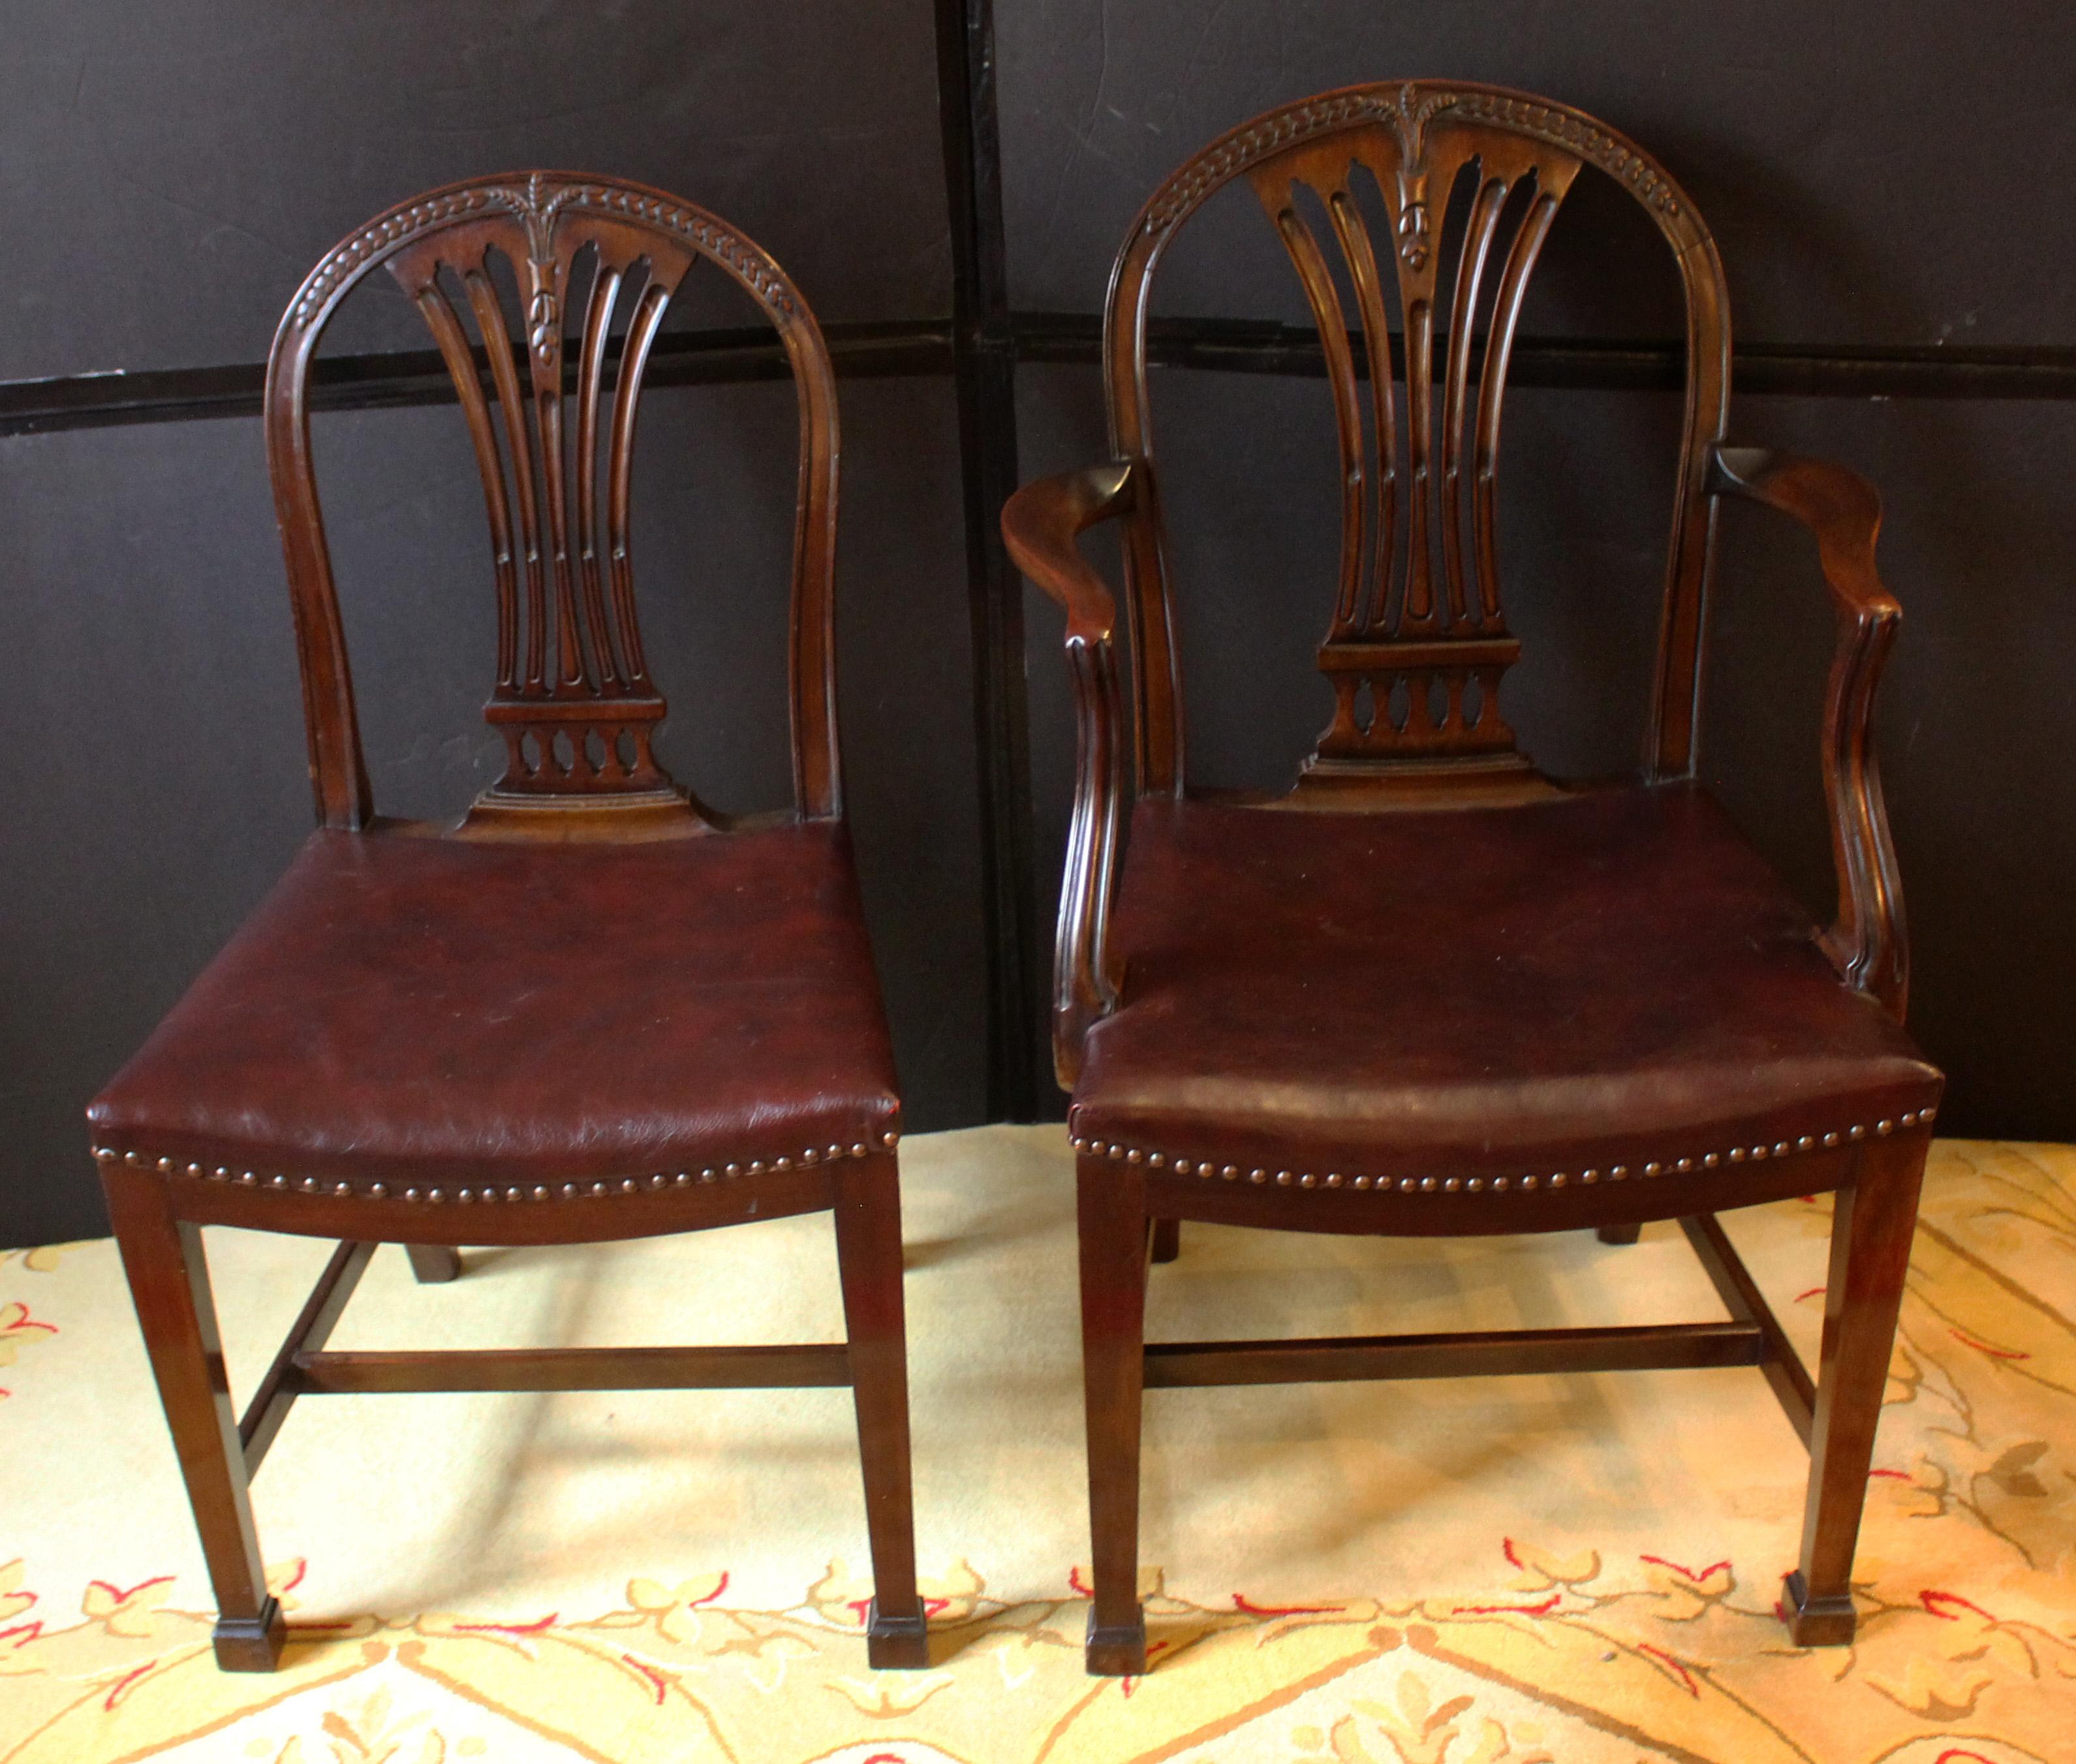 Late 19th century set of 8 dining chairs, English, Hepplewhite style. Mahogany. 2 arms & 6 sides. Leather upholstered saddle seats. Wheat & bellflower carved crests. Cut work backplats with molding & stop fluting over a colonnade. Marlborough front